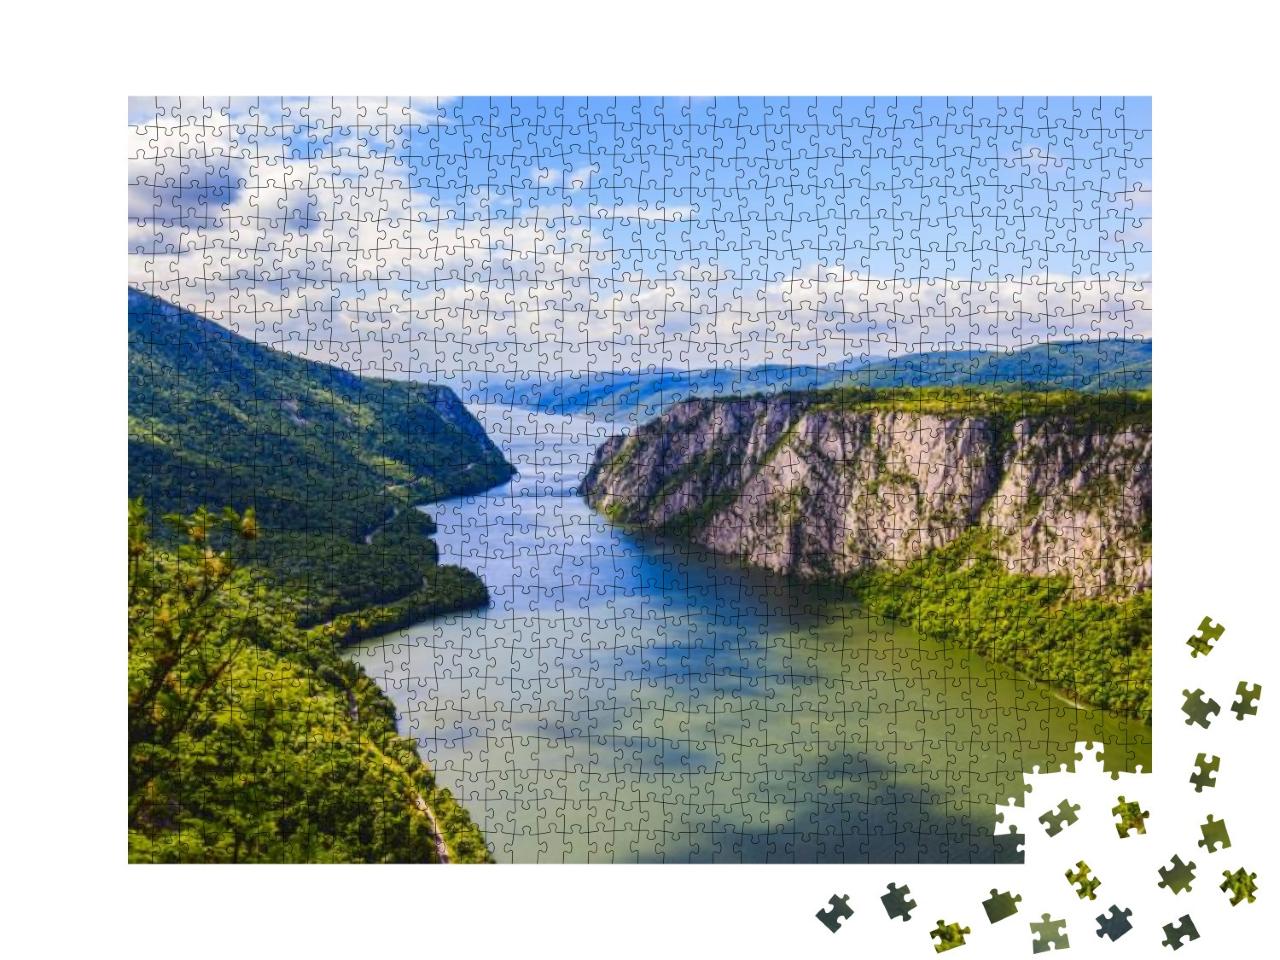 Beautiful Nature Landscape, Gorge Danube River, the Iron... Jigsaw Puzzle with 1000 pieces